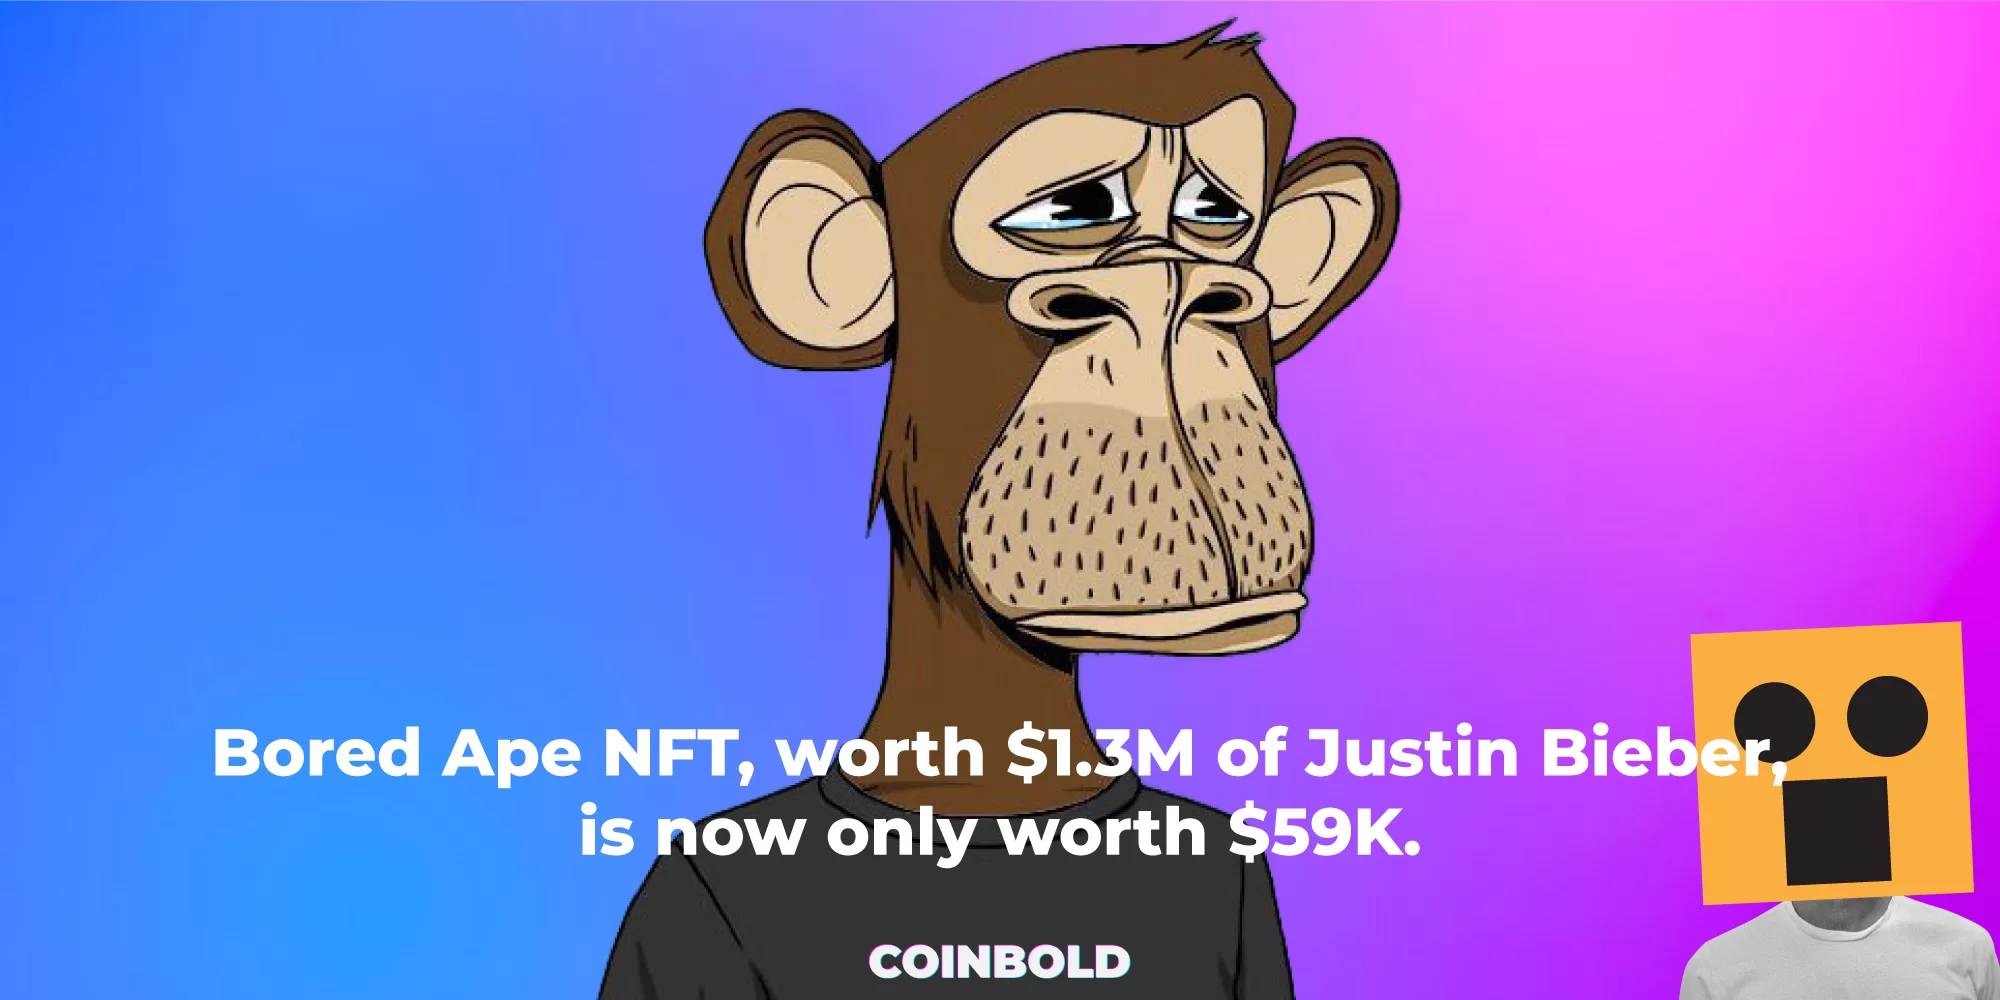 Bored Ape NFT, worth $1.3M of Justin Bieber, is now only worth $59K.